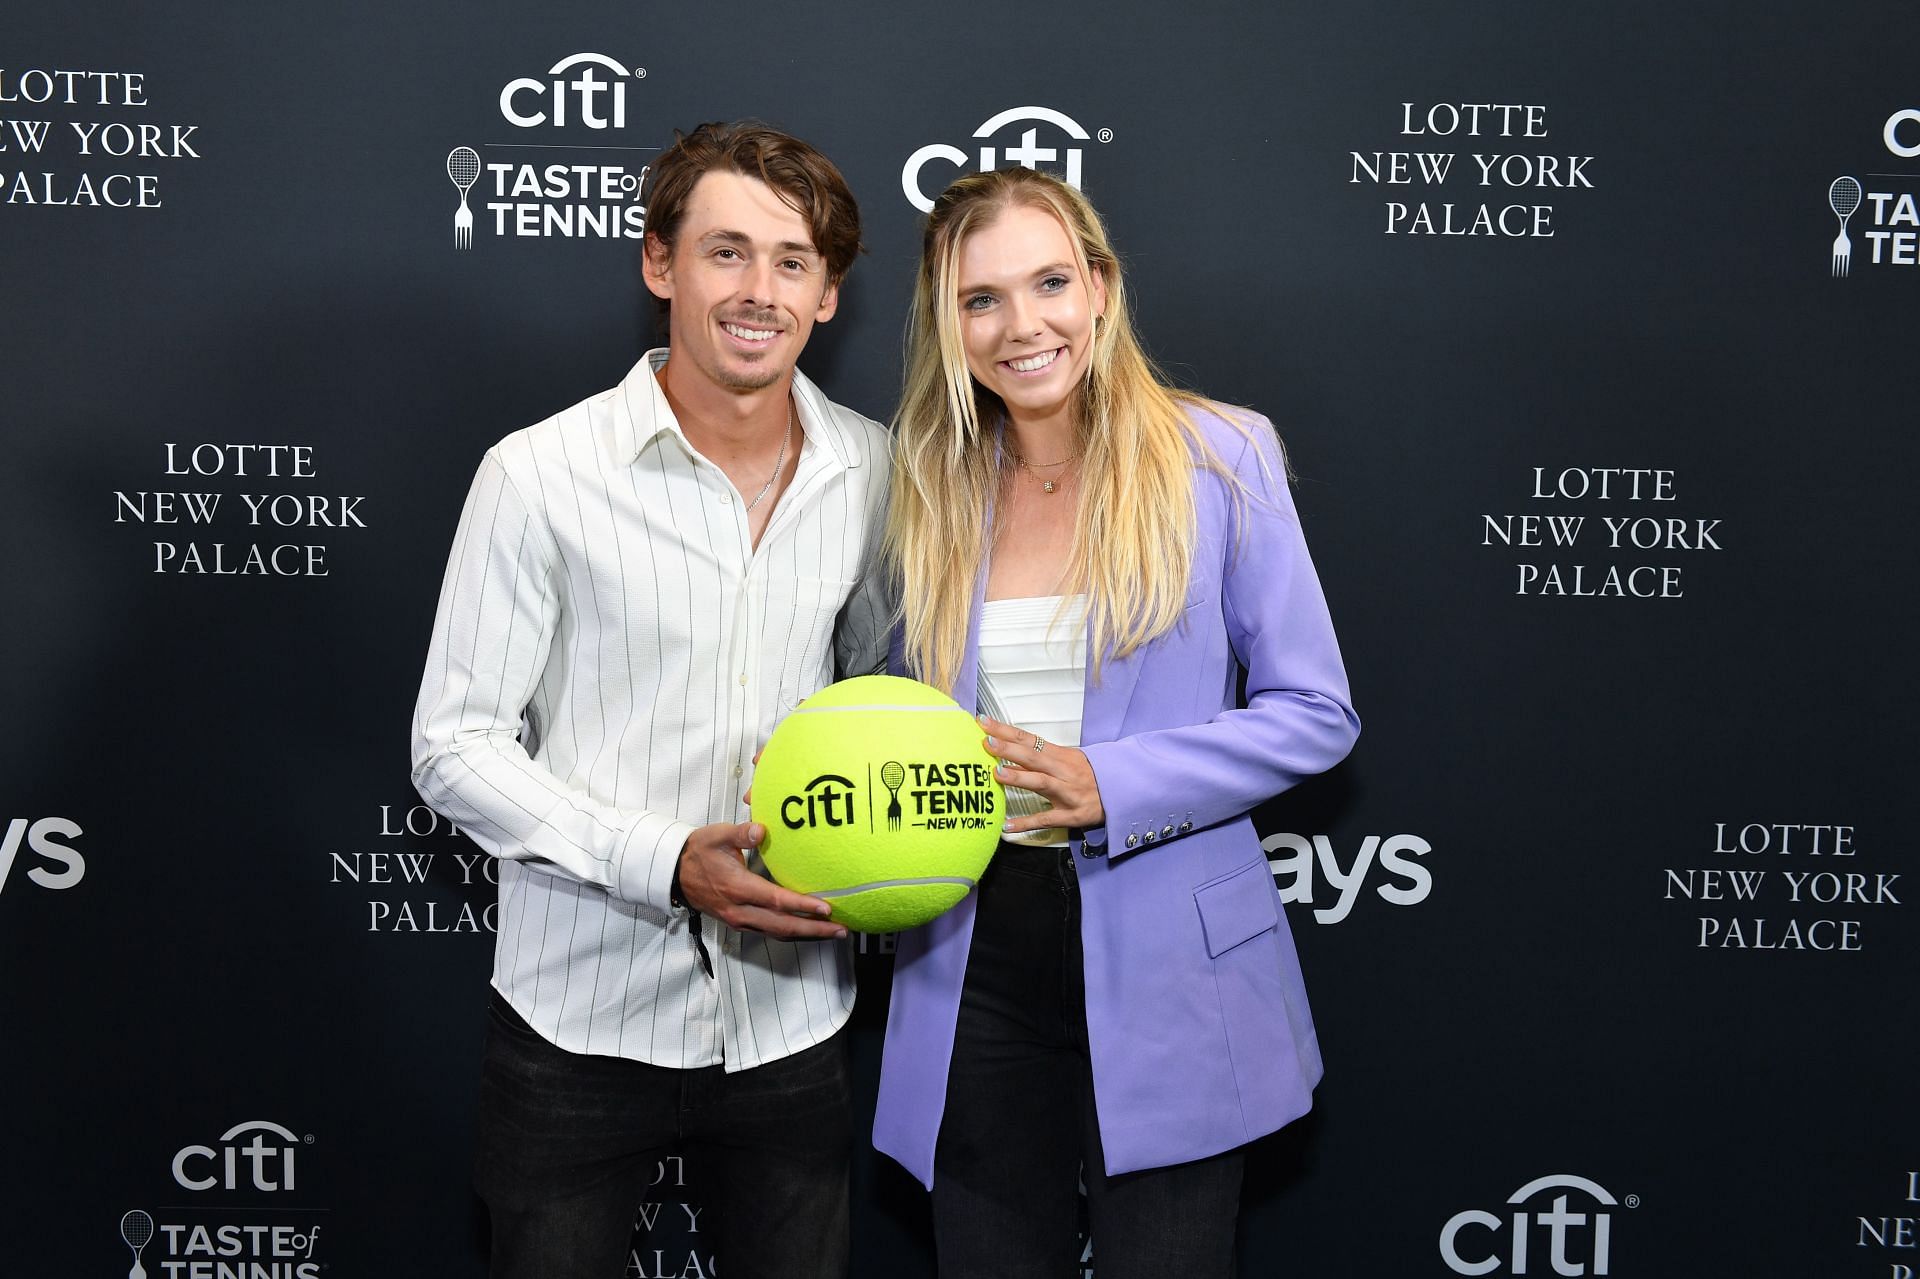 The couple pictured together at Citi Taste of Tennis